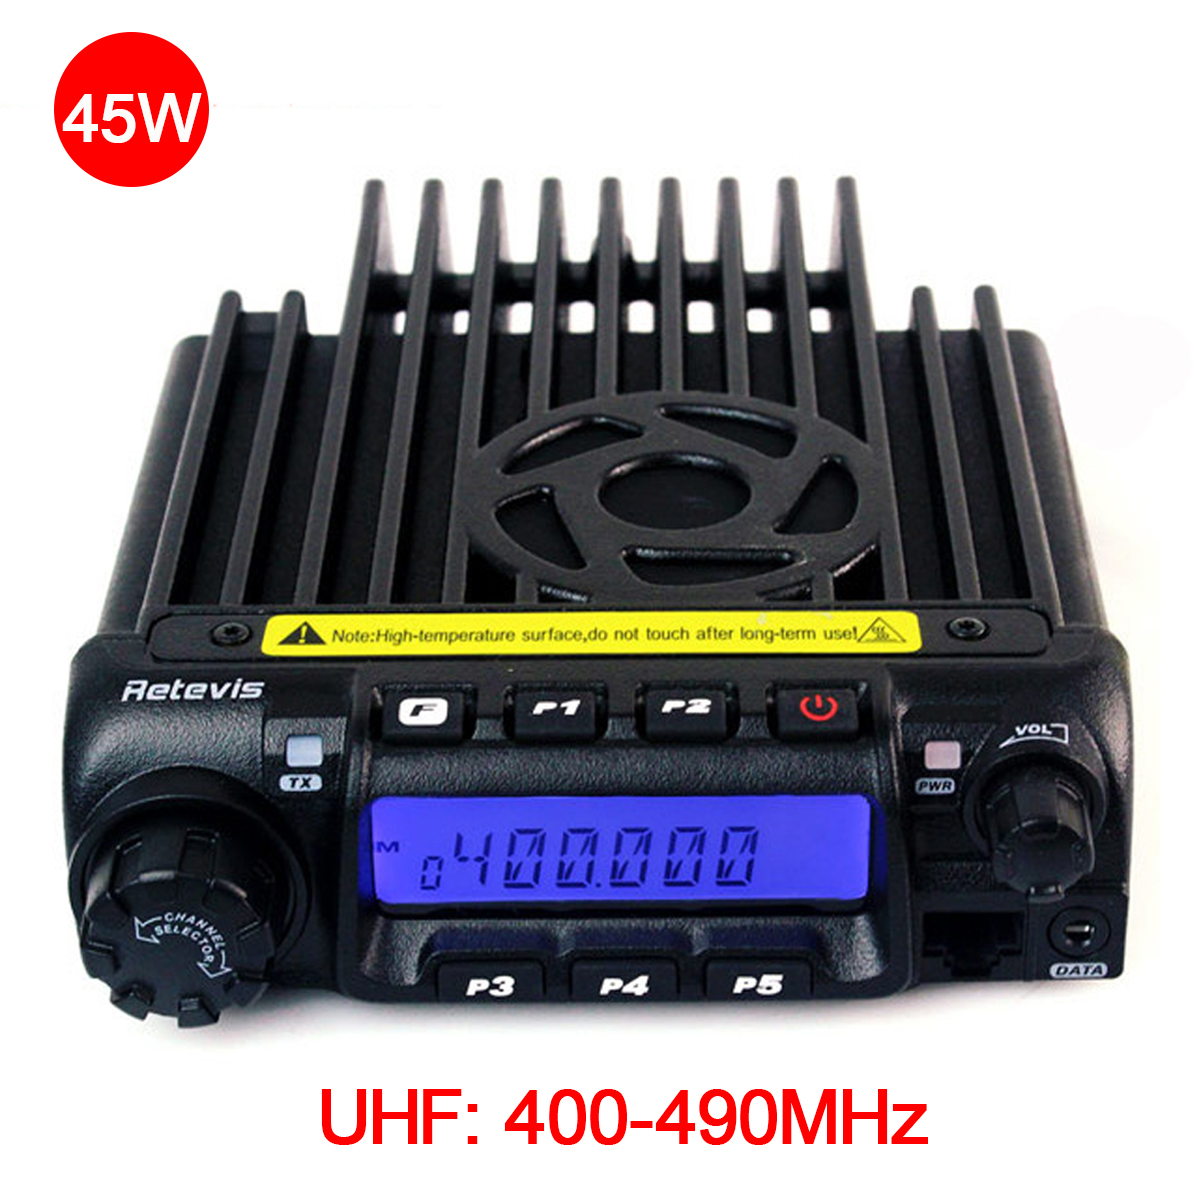 

Retevis RT-9000D VHF 400-490MHz Mobile Car Radio Transceiver 200CH 50CTCSS 60W